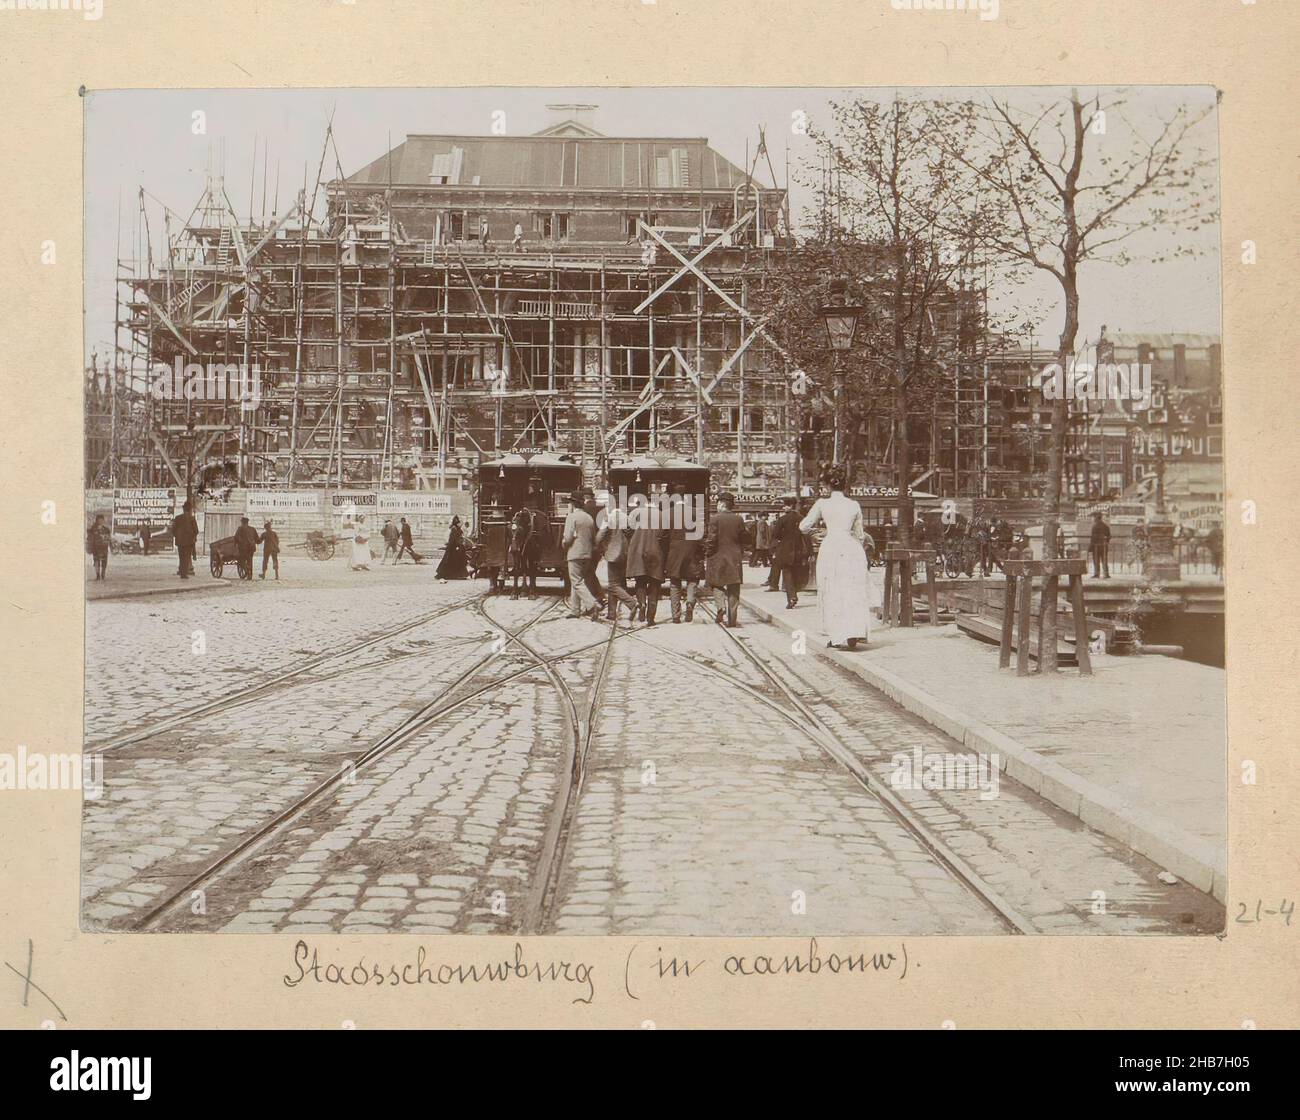 Stadsschouwburg Amsterdam under construction, Photo 4 on album page 21 from album Amsterdam 1890-1894., maker: Hendrik Herman van den Berg, Amsterdam, in or after 1890 - in or before 1894, photographic support WZQTR Stock Photo